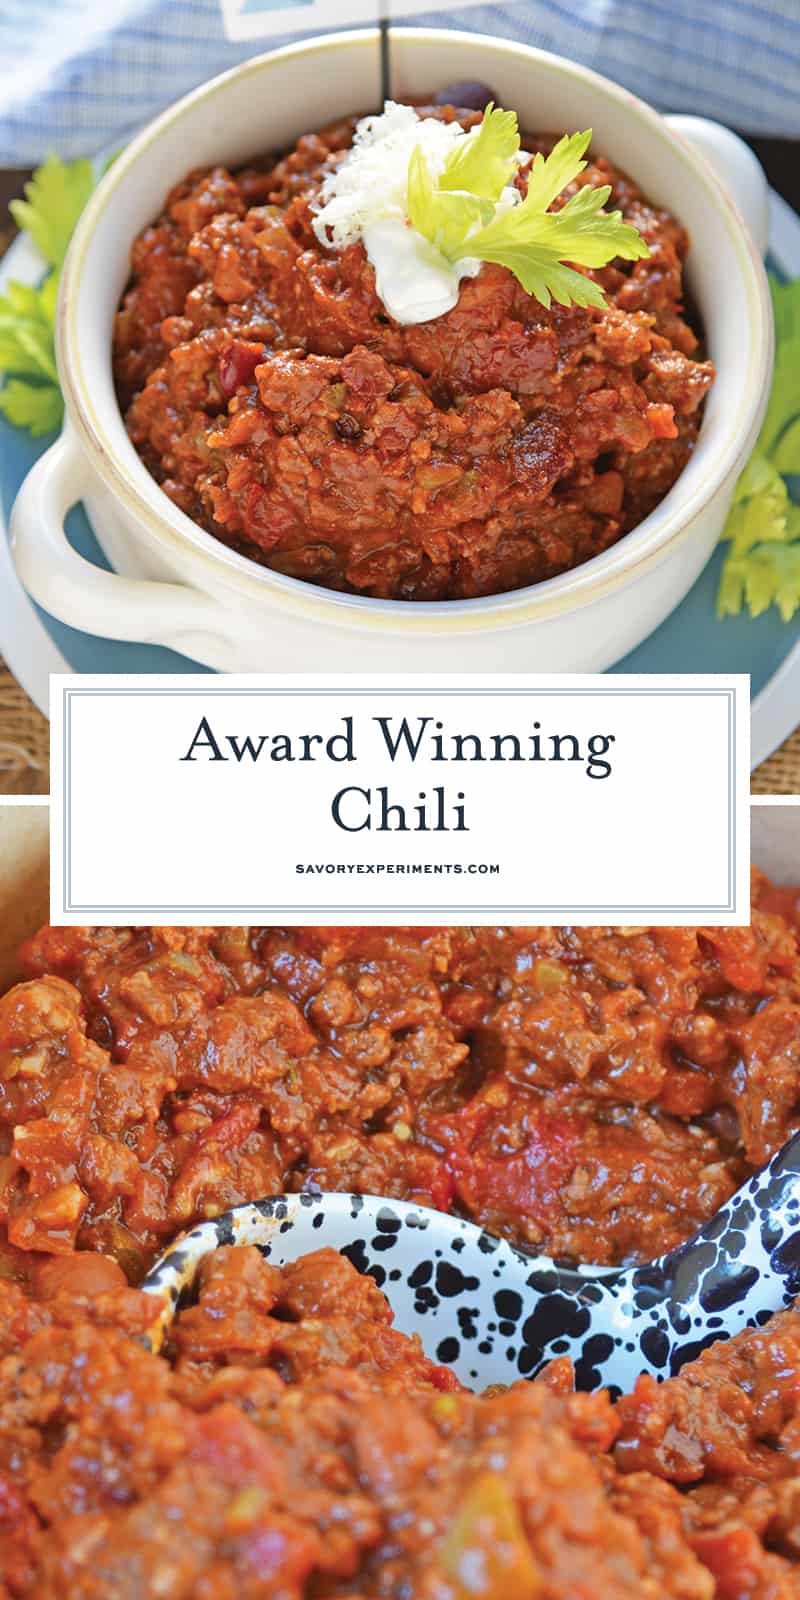 Blue Ribbon Award Winning Chili is a chili cook-off winning recipe! A robust and rich stew loaded with beef, sausage, bacon and tons of vegetables. #awardwinningchili #chilirecipe www.savoryexperiments.com